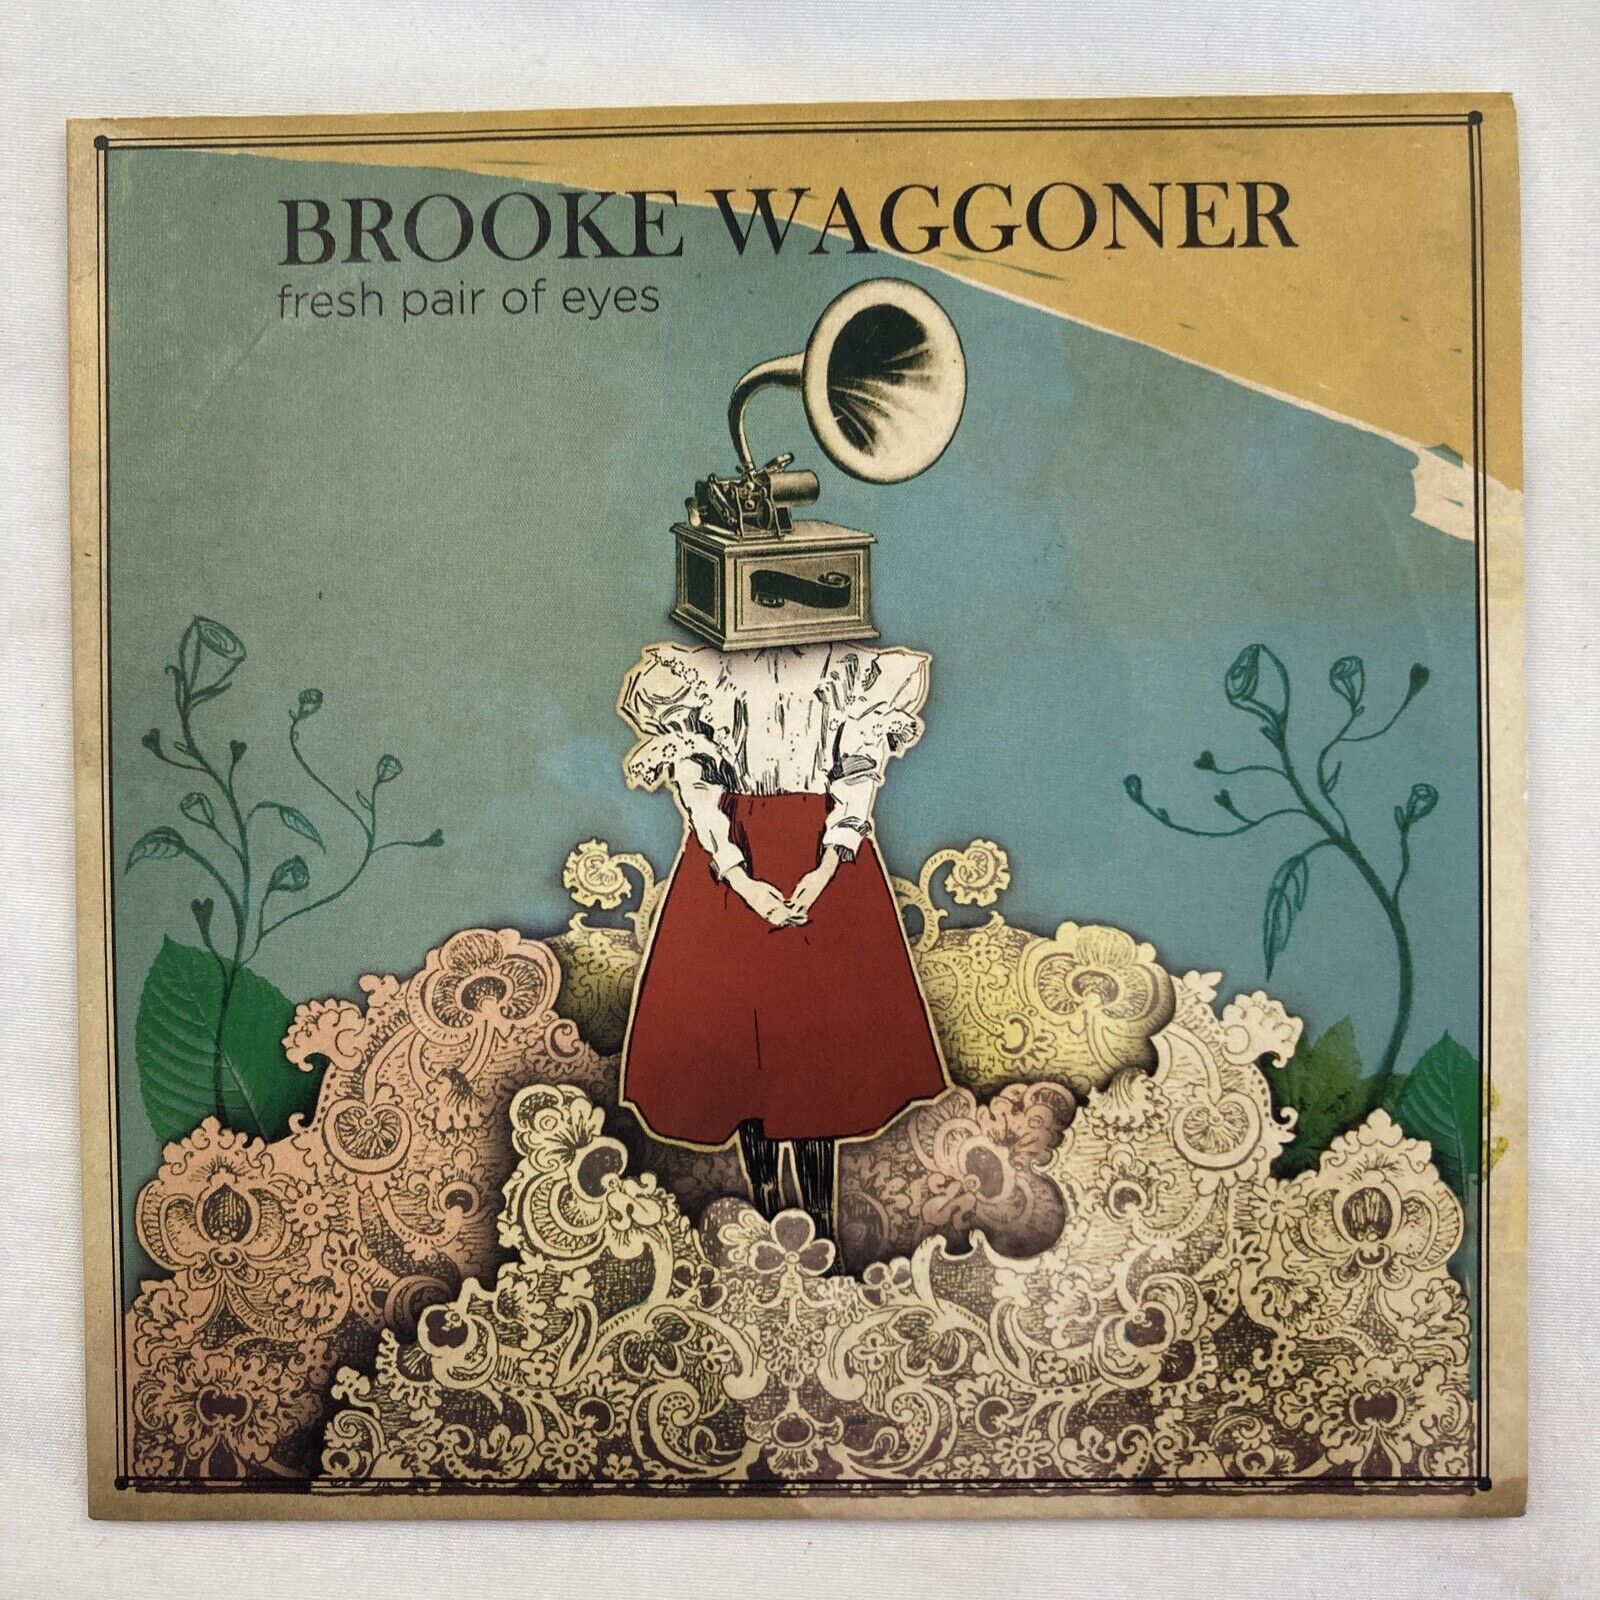 Fresh Pair of Eyes by Brooke Waggoner (CD, 2007, Swoon Moon Music)